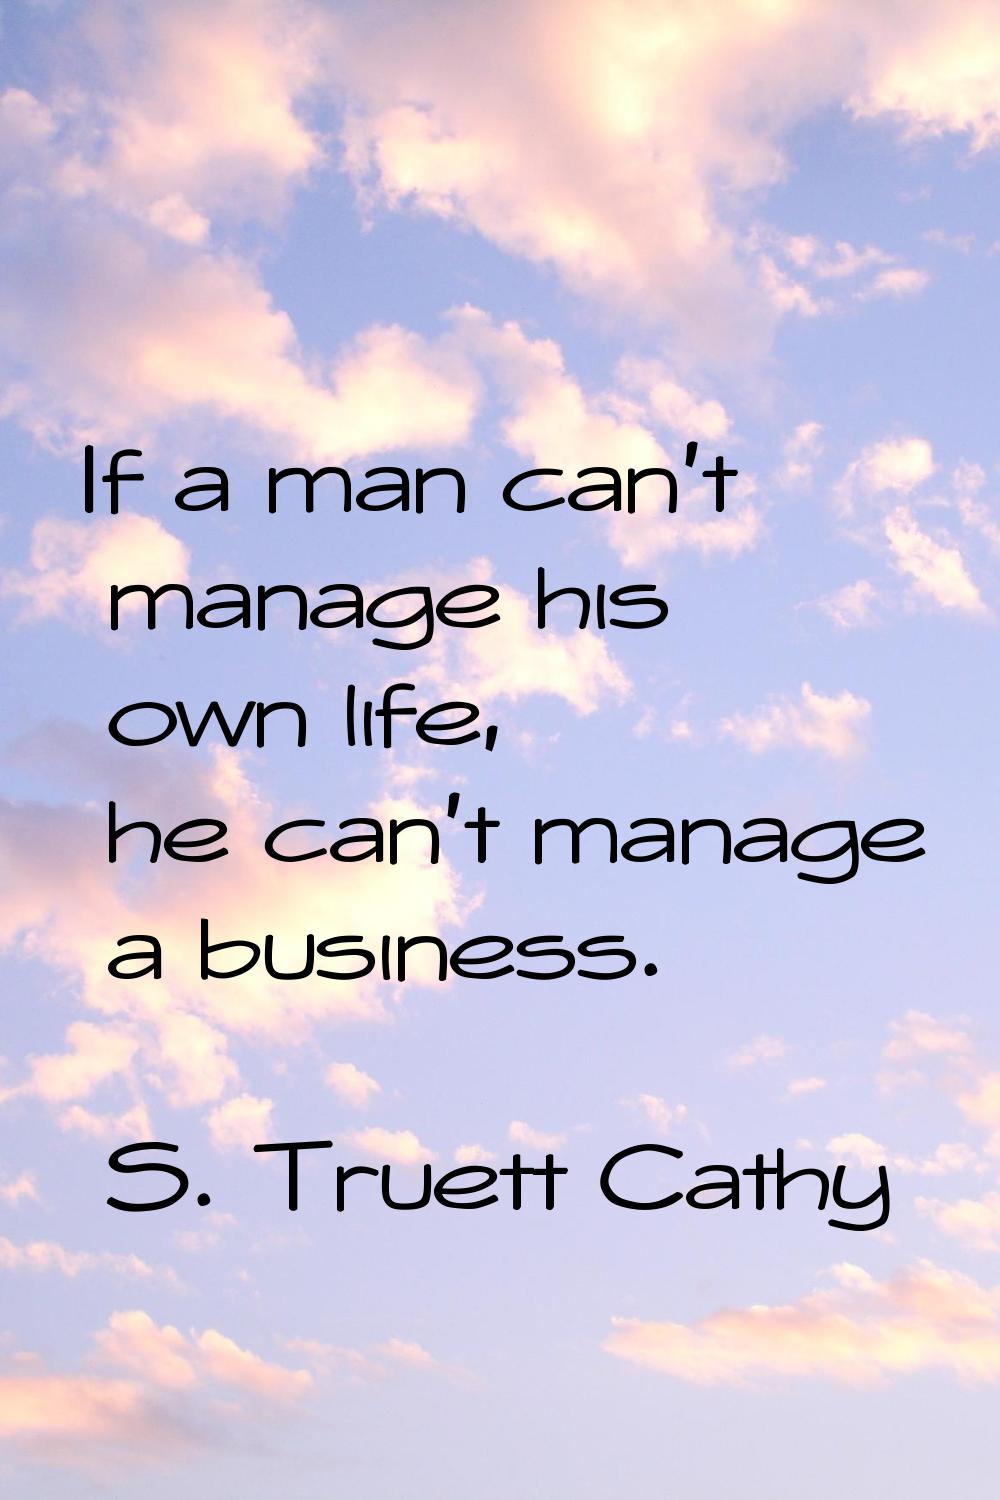 If a man can't manage his own life, he can't manage a business.